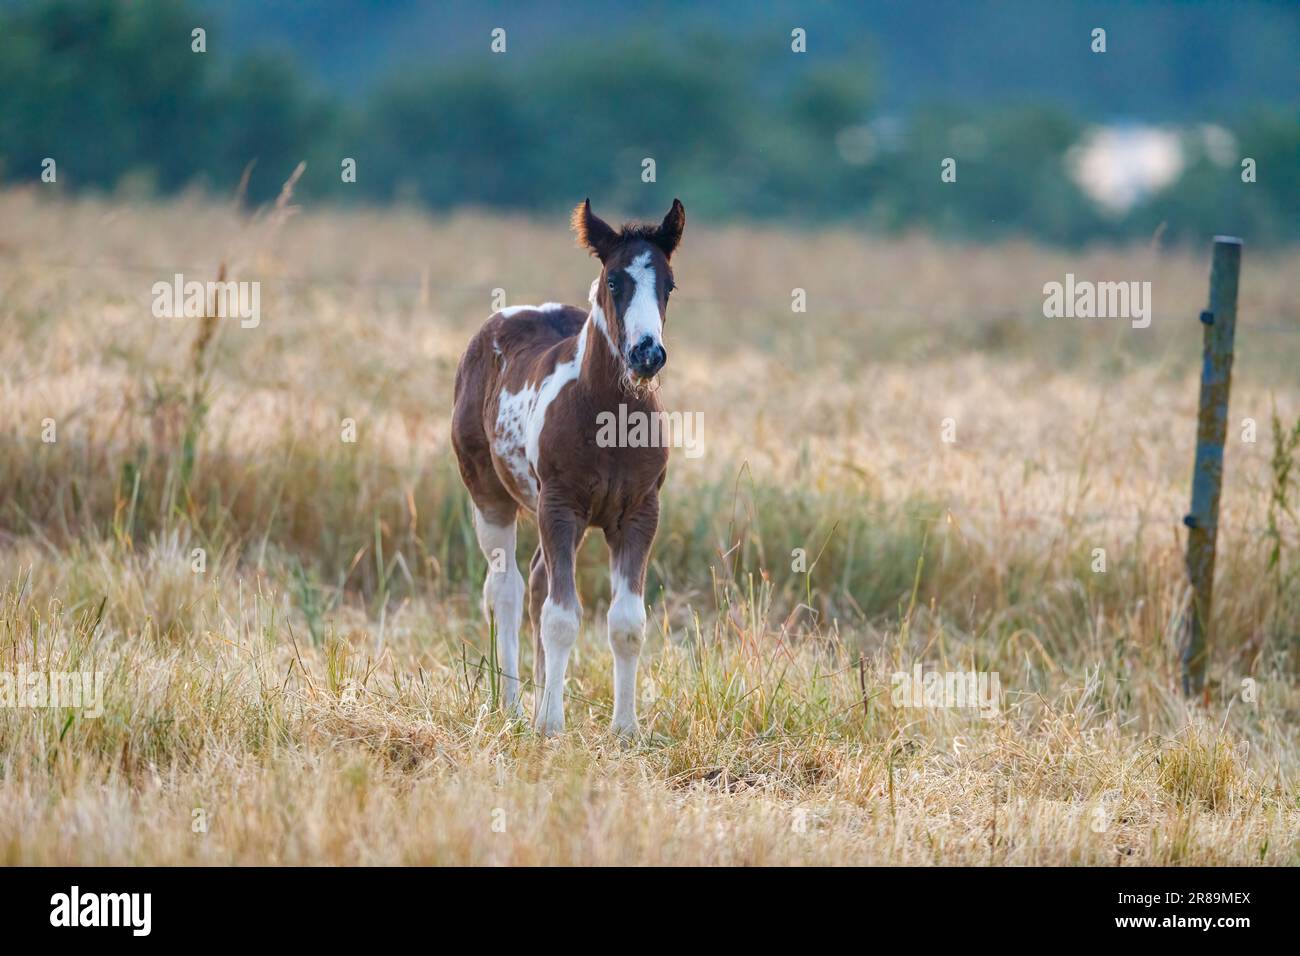 A young foal o a meadow Stock Photo